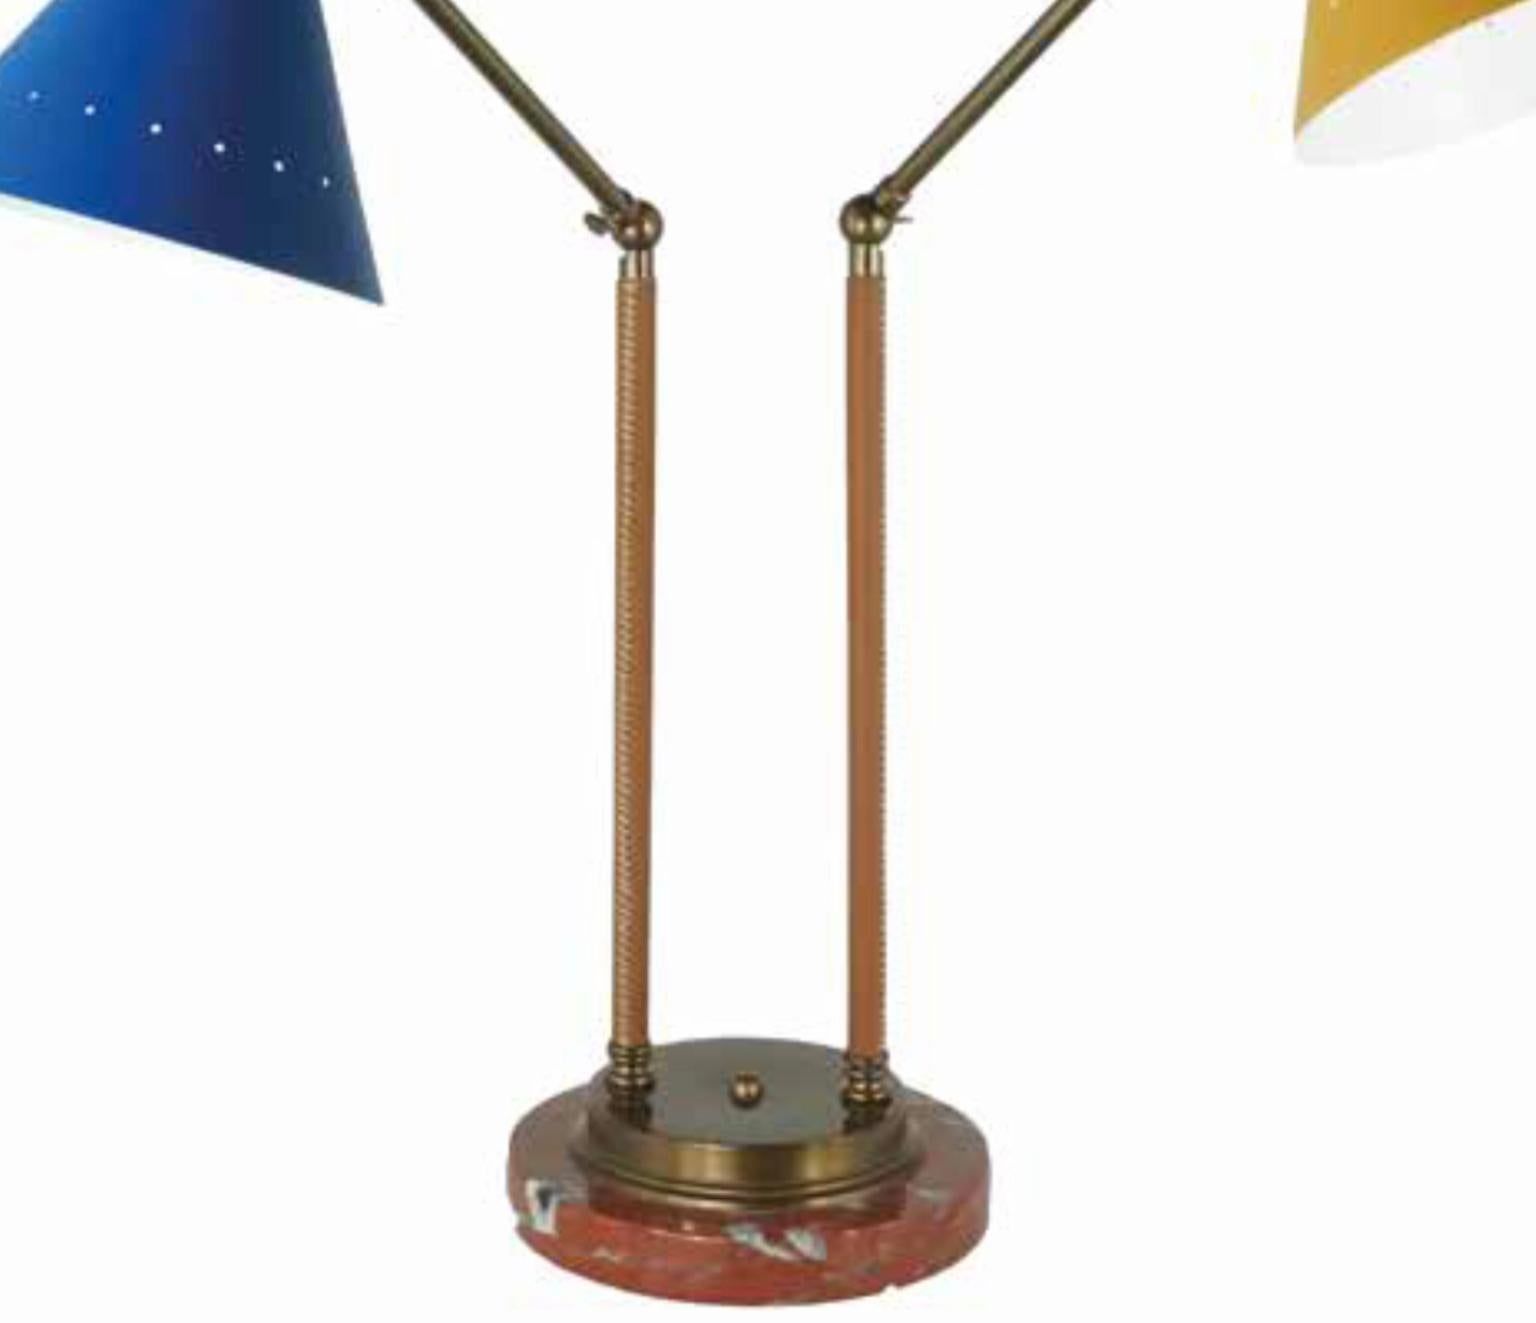 Table lamp in brass with shaft covered by hand sewed genuine cow leather. Double swinging arms and painted metal shades in blue and yellow. Base in red Italian marble. The brass has a burnished finish.

Eu wiring.
Rest of the world wiring